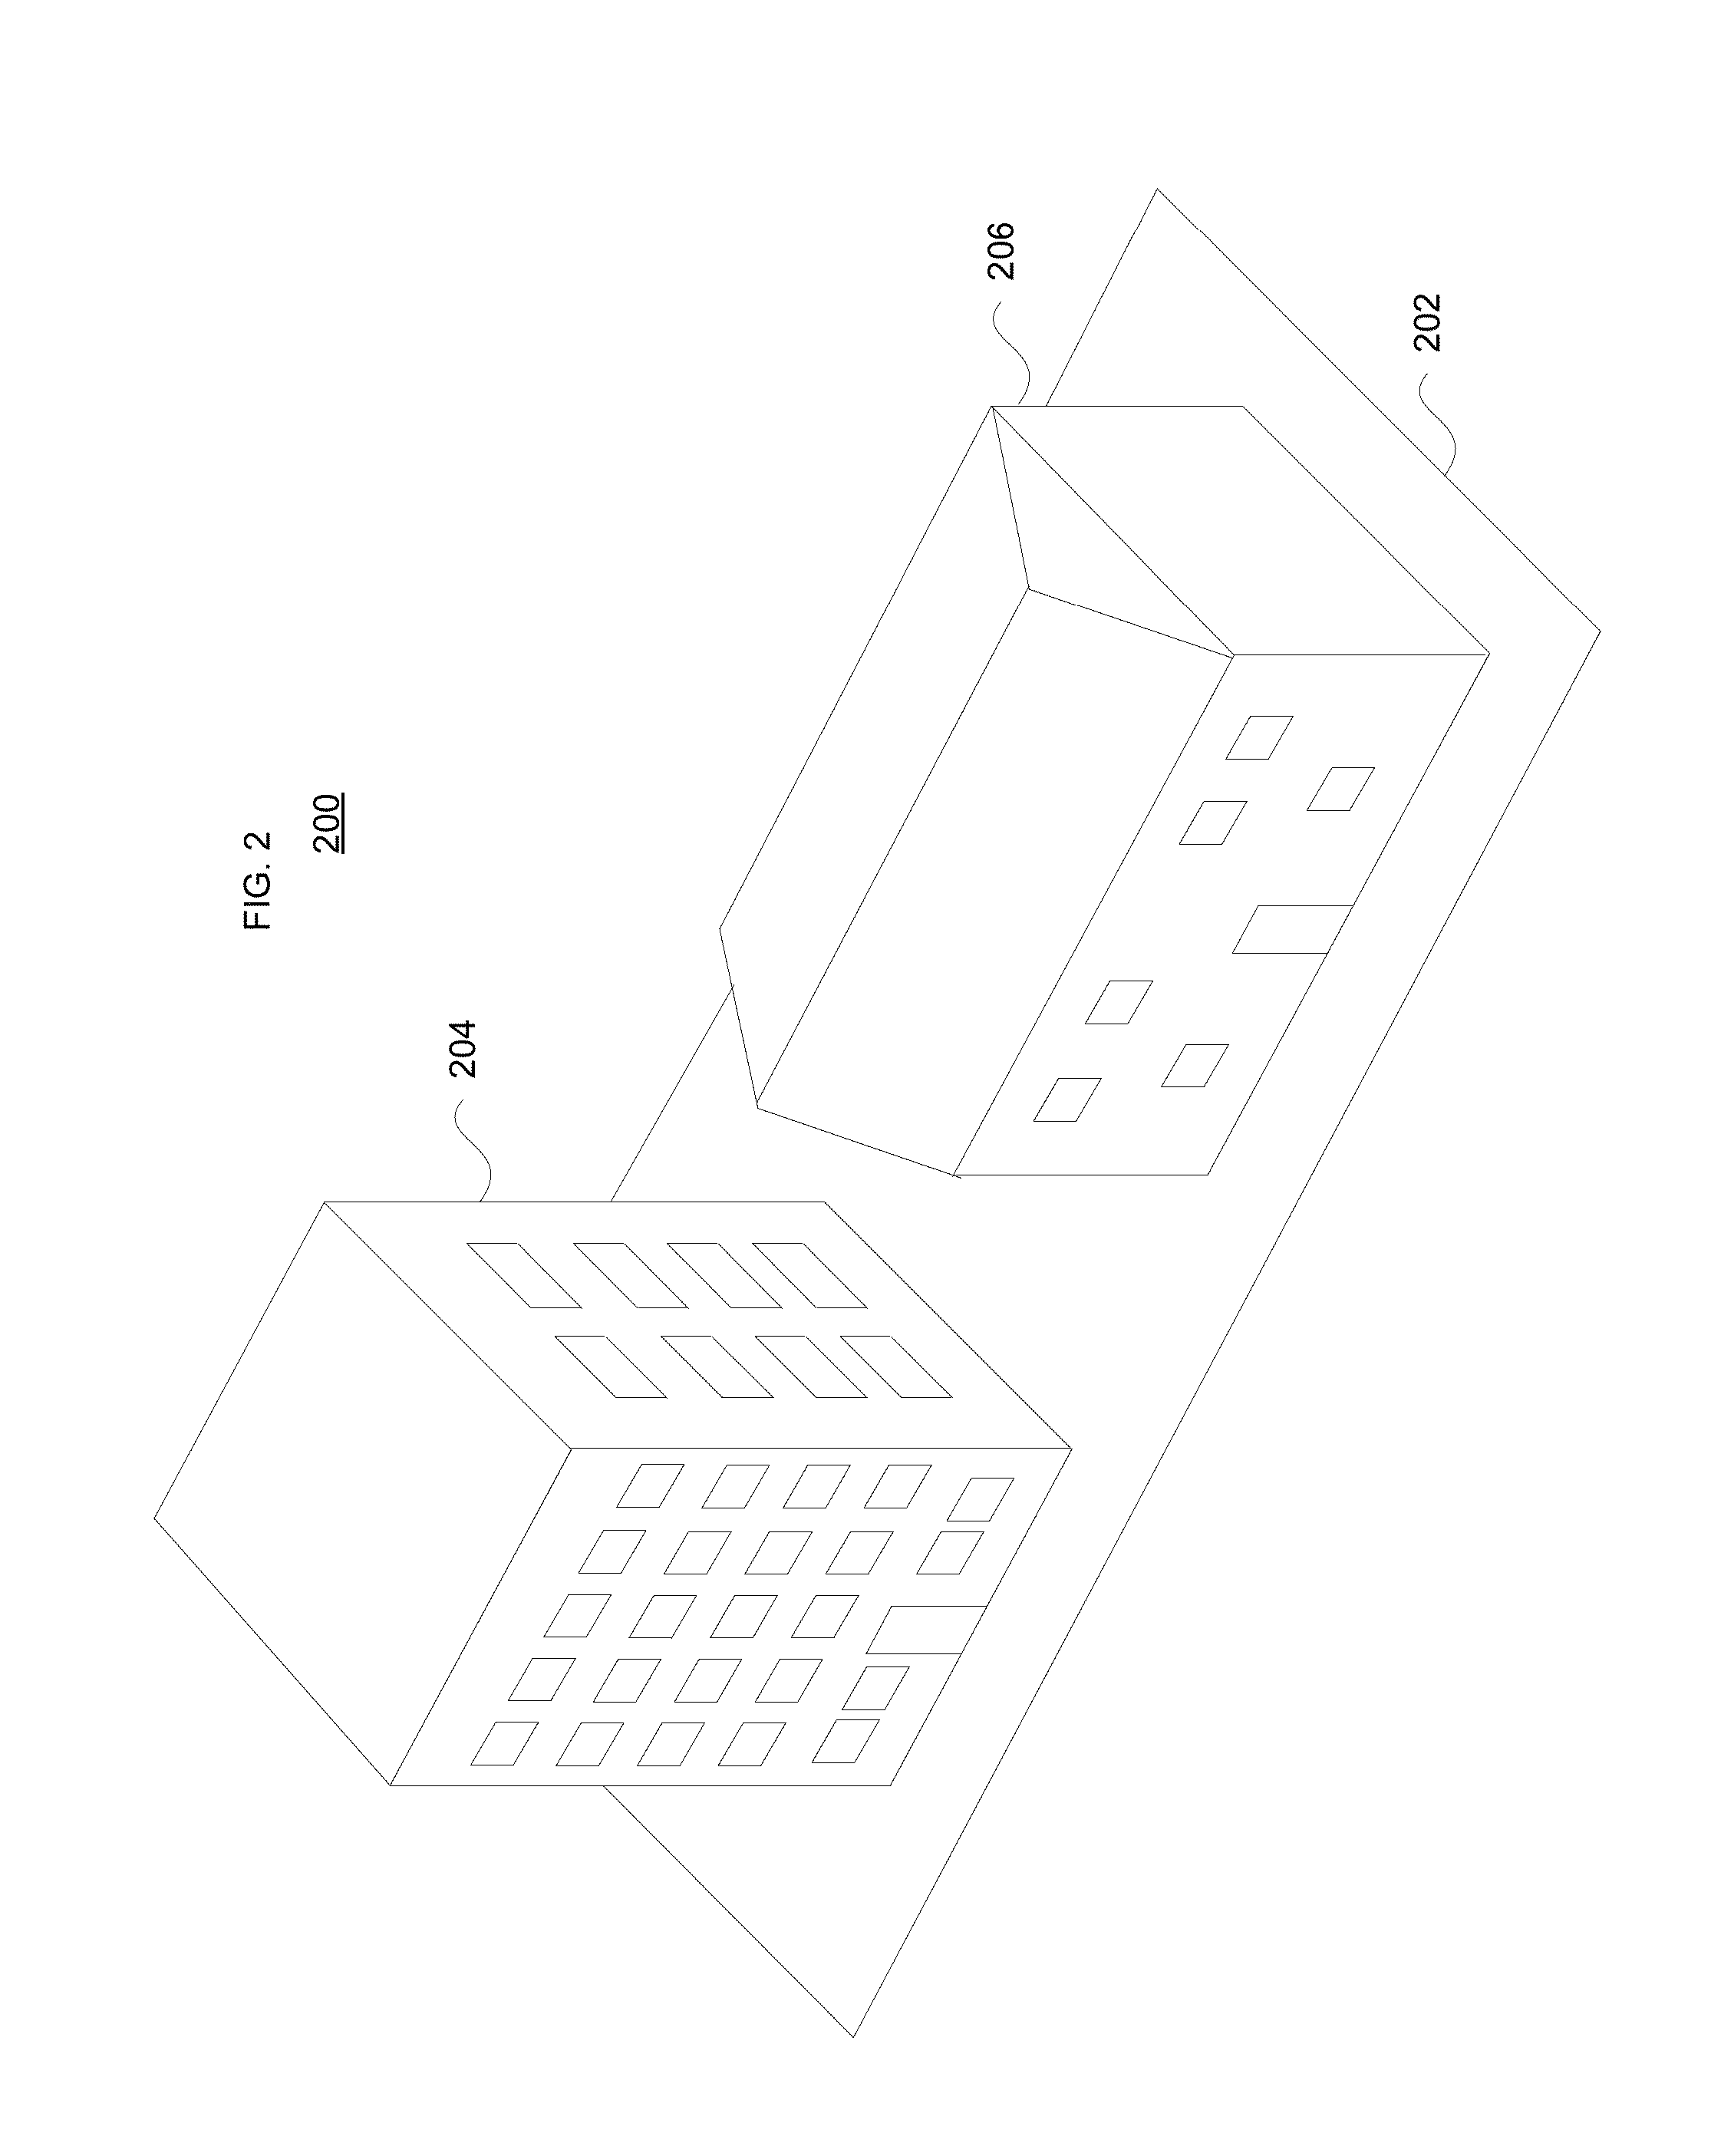 Interactive geo-referenced source imagery viewing system and method